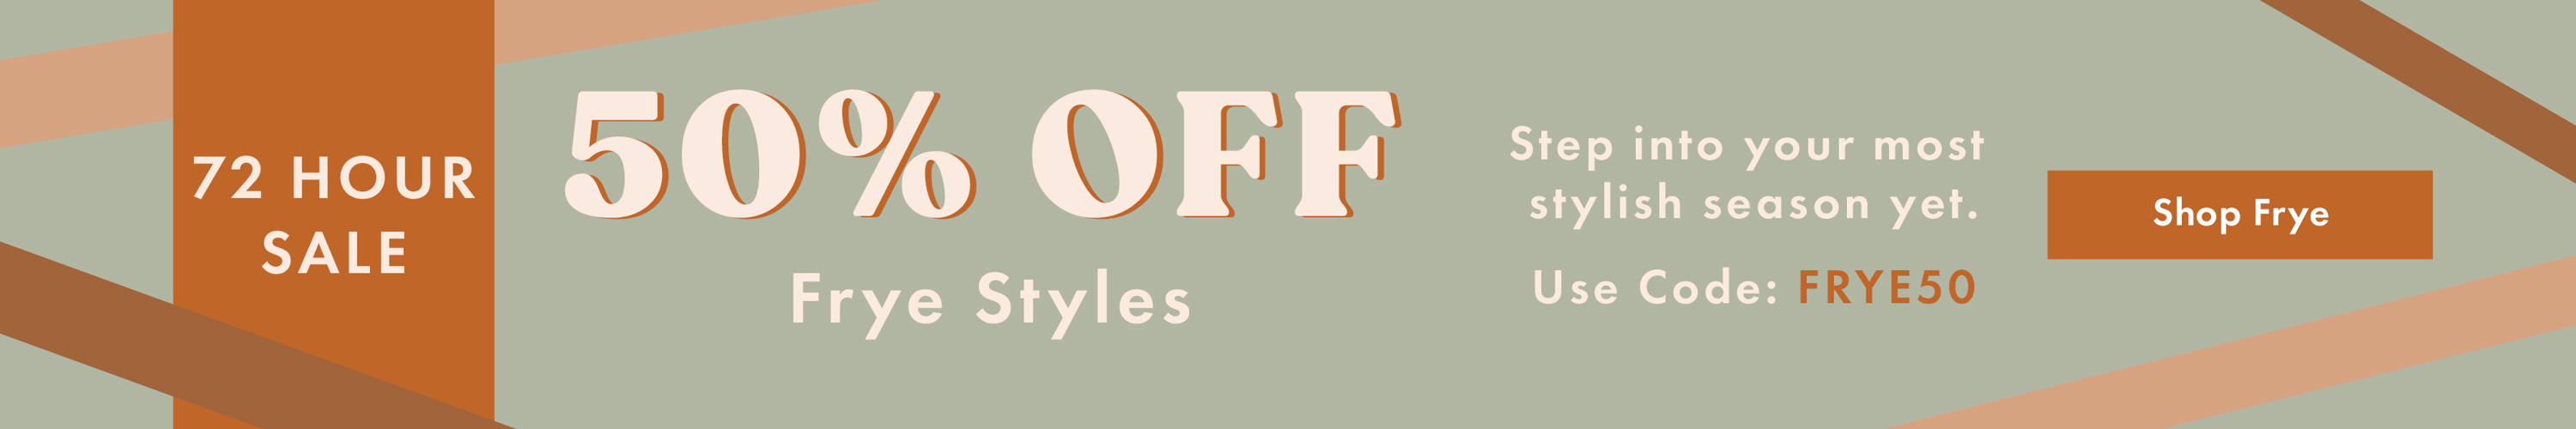 72 Hours Only: 50% Off Frye - Use Code FRYE50